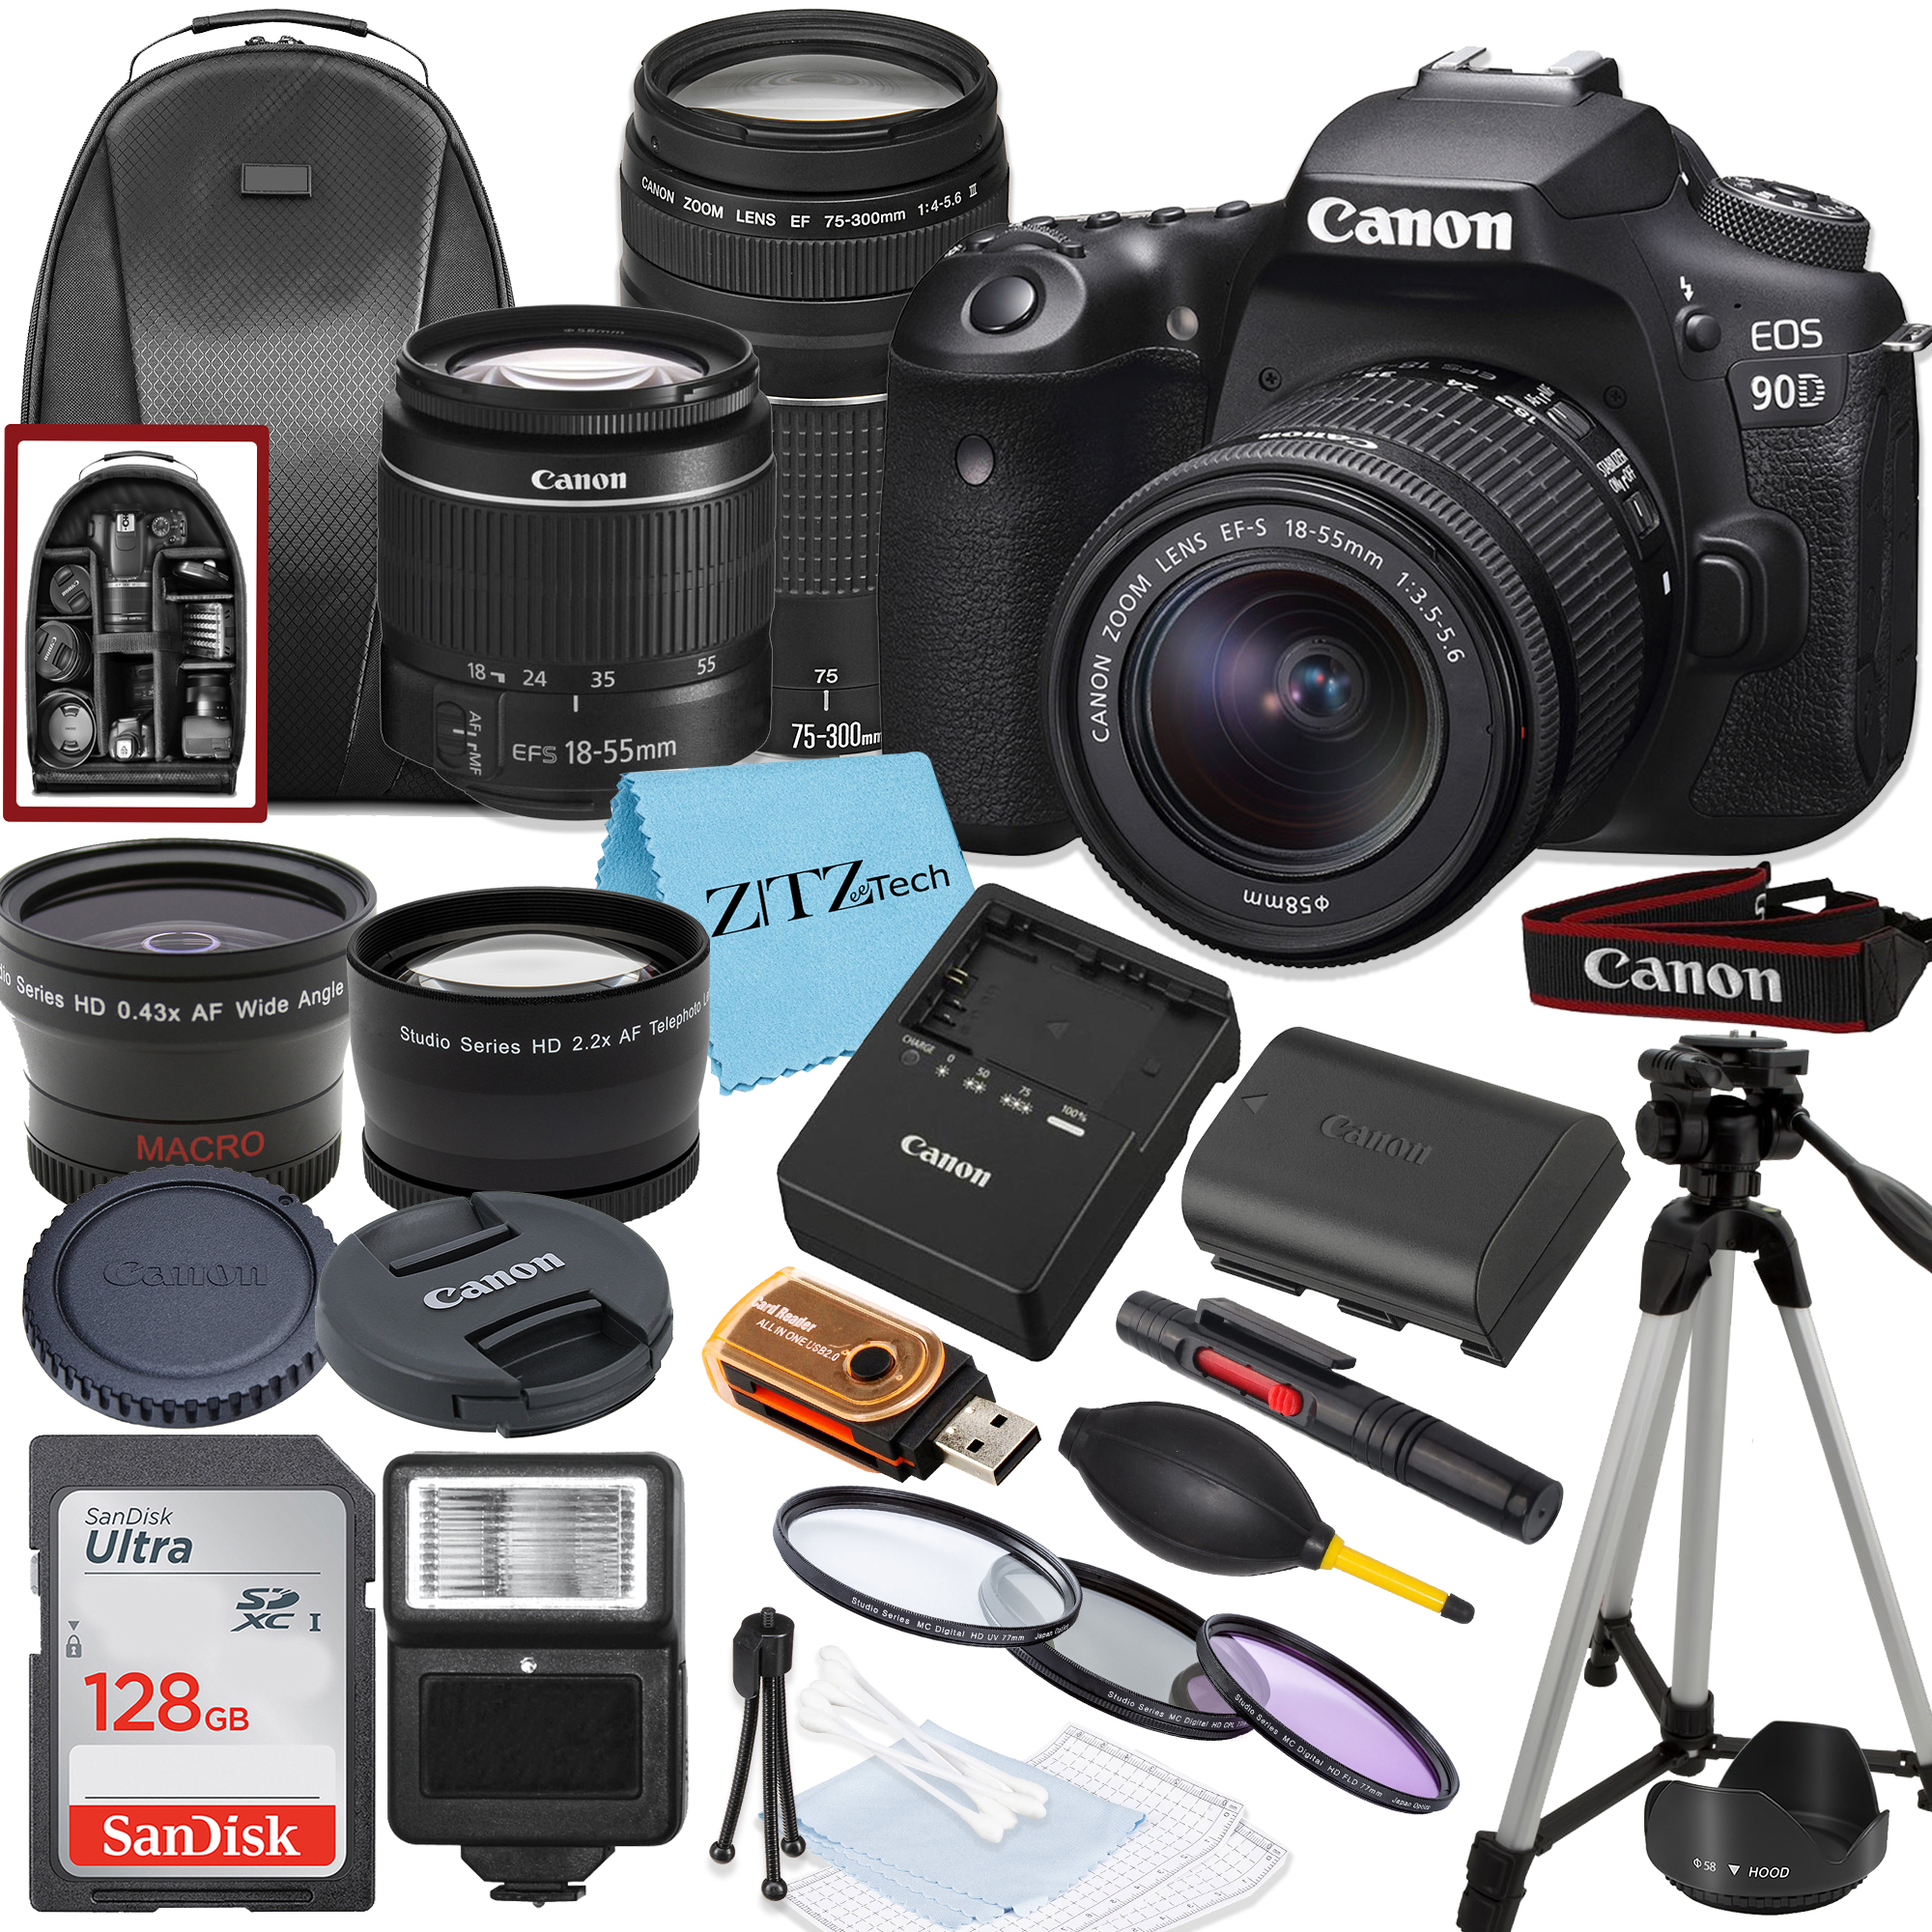 Canon EOS 90D DSLR Camera with 18-55mm, 75-300mm Lens, SanDisk 128GB Card, Backpack, Flash, Tripod and ZeeTech Accessory Bundle